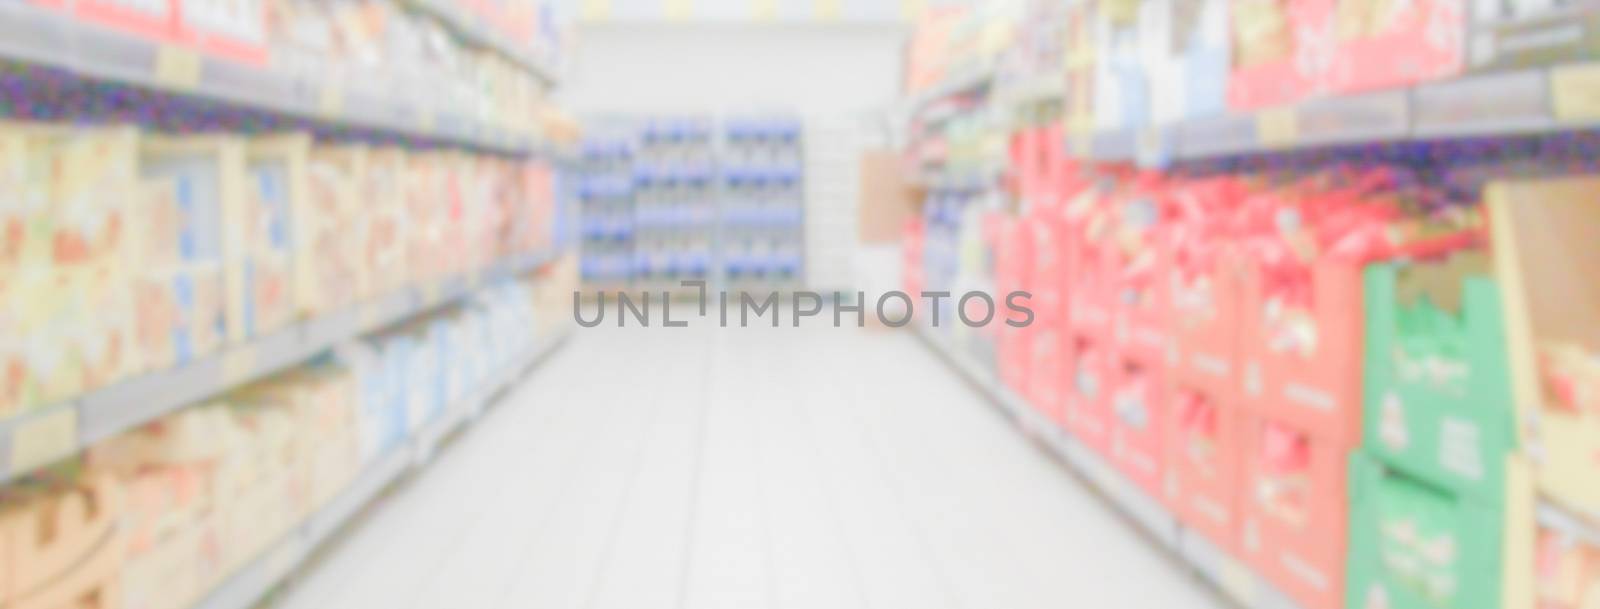 Defocused background within the aisles full of grocery goods in a supermarket or hypermarket convenience store. Intentionally blurred post production for bokeh effect